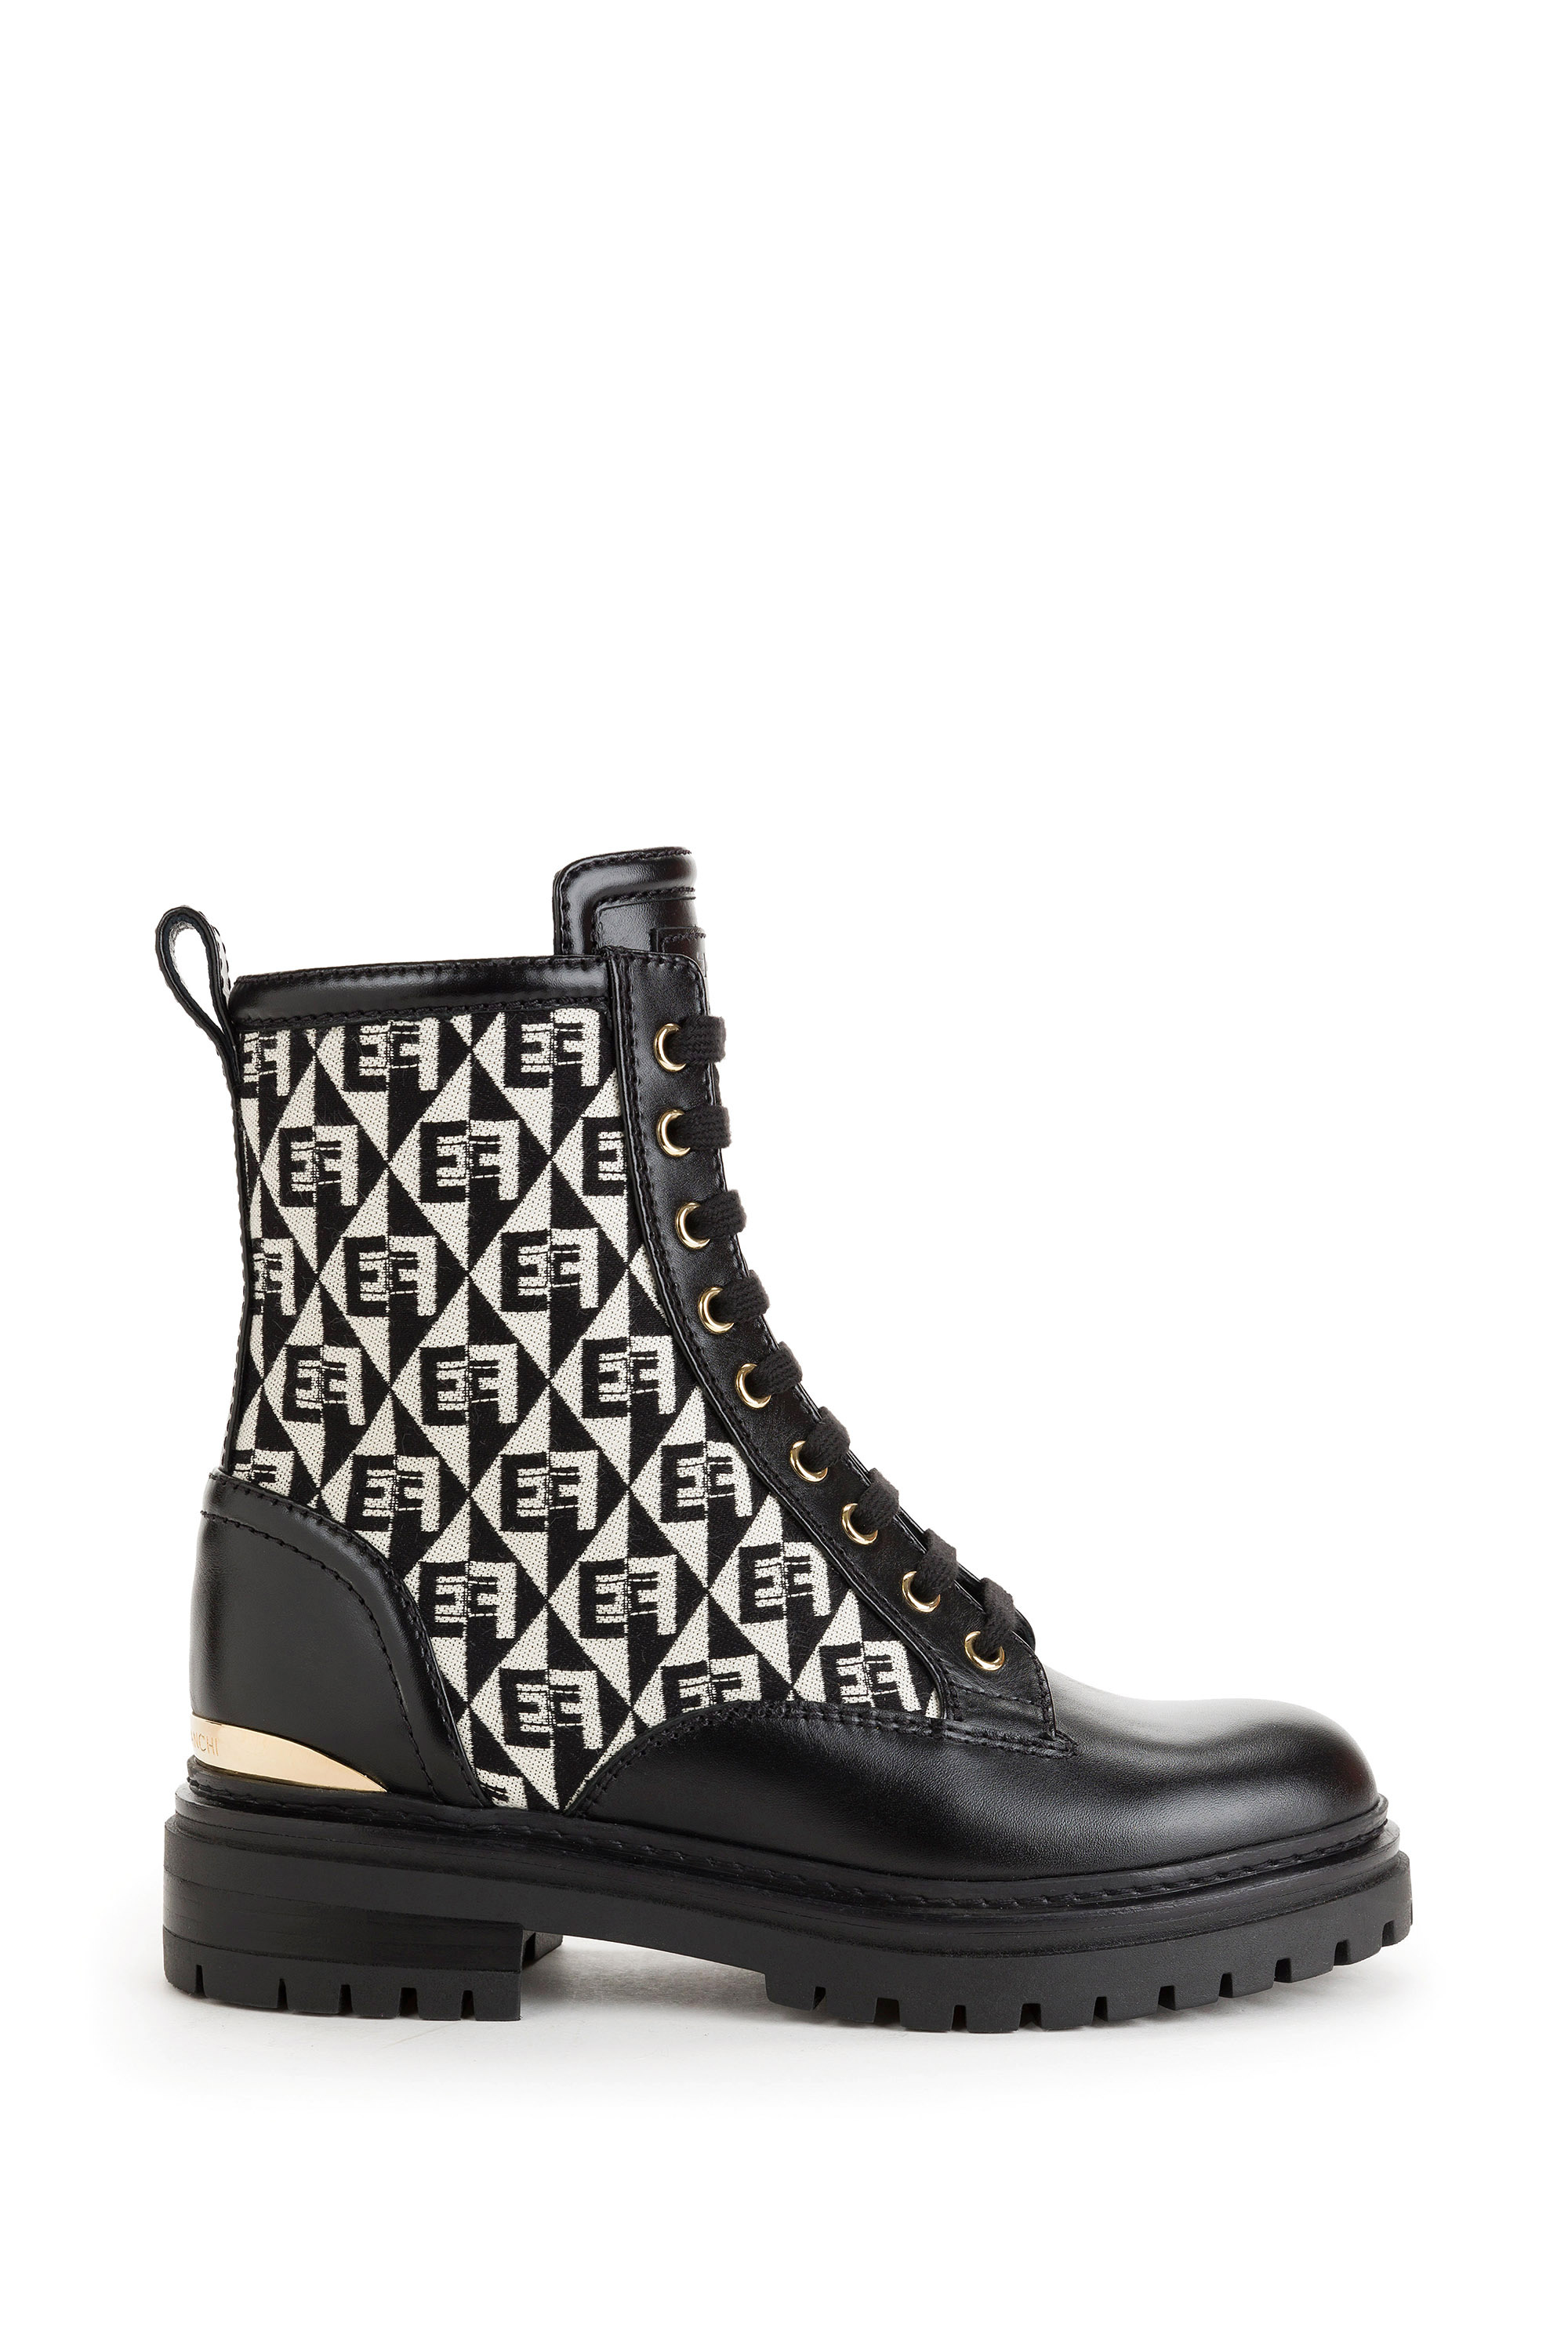 Biker boots in jacquard and leather with diamond pattern | Elisabetta